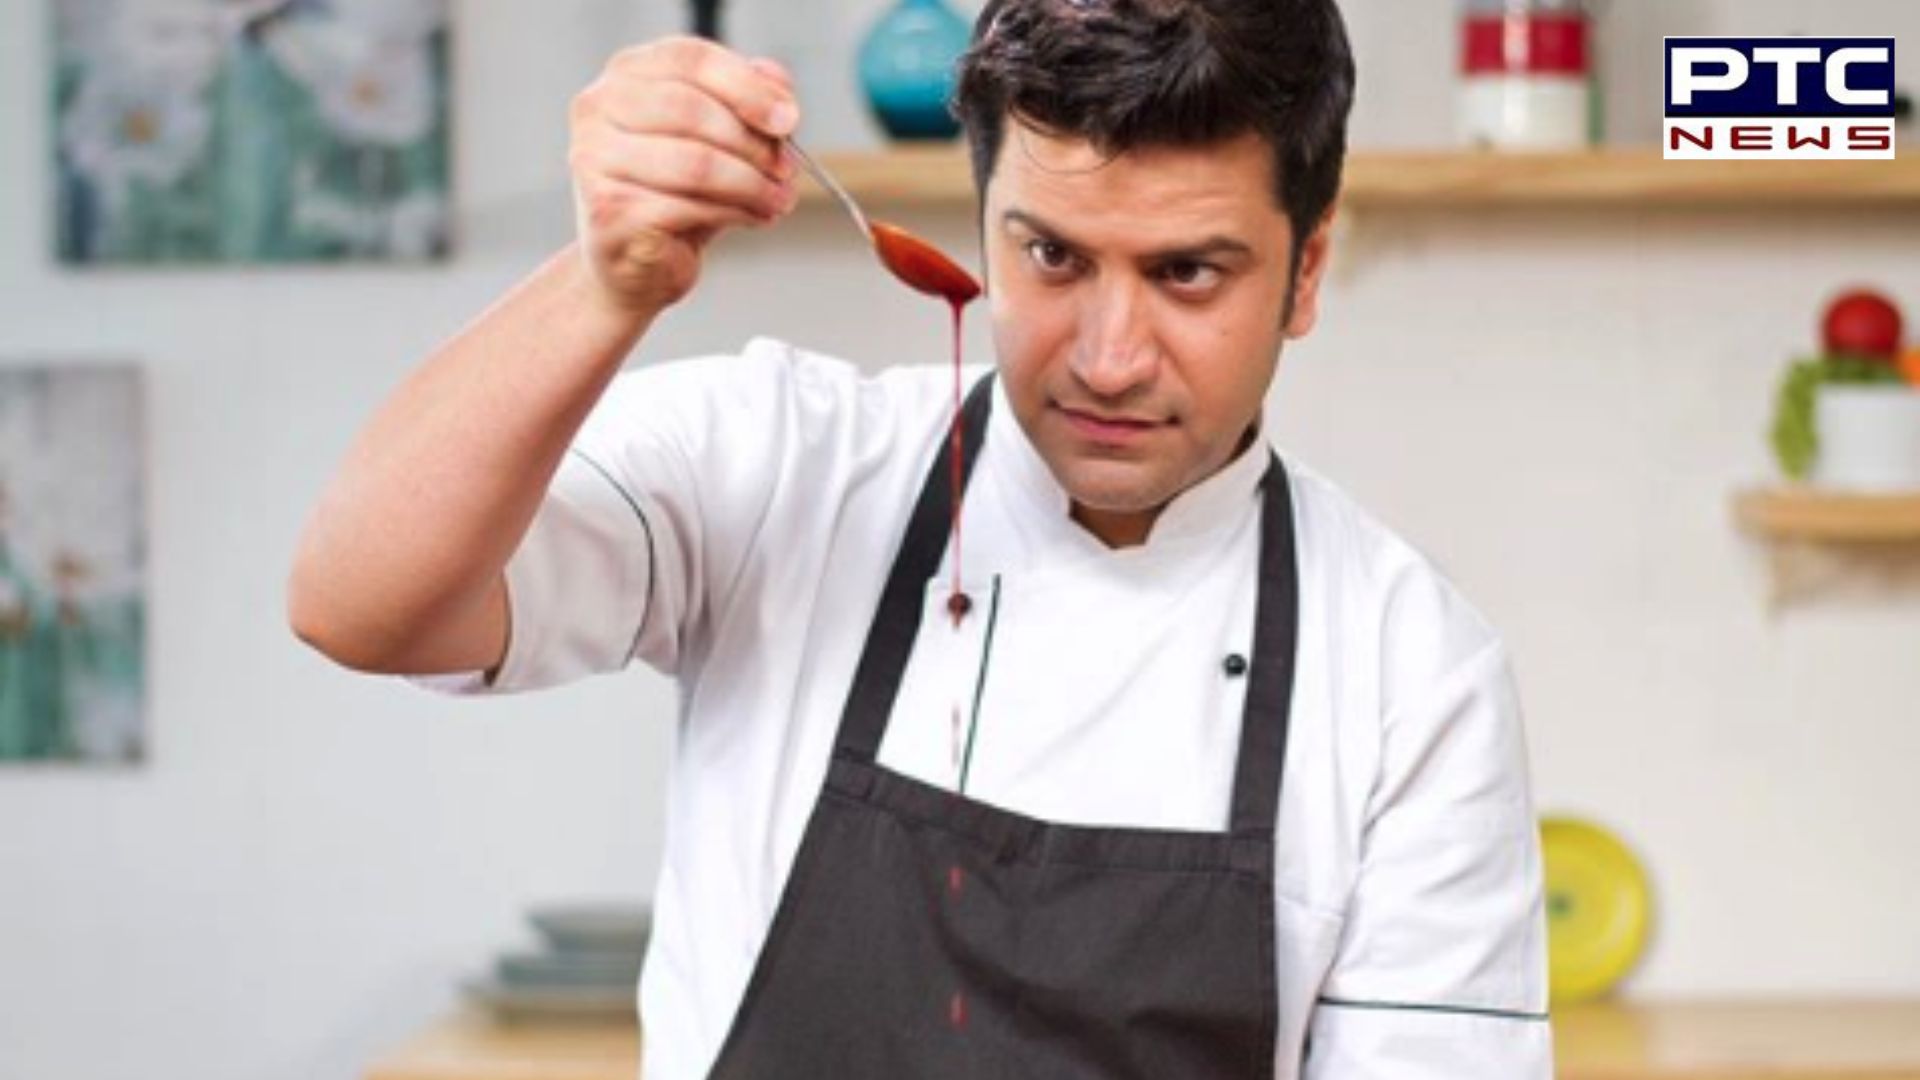 Celebrity chef Kunal Kapur granted divorce on grounds of cruelty by wife